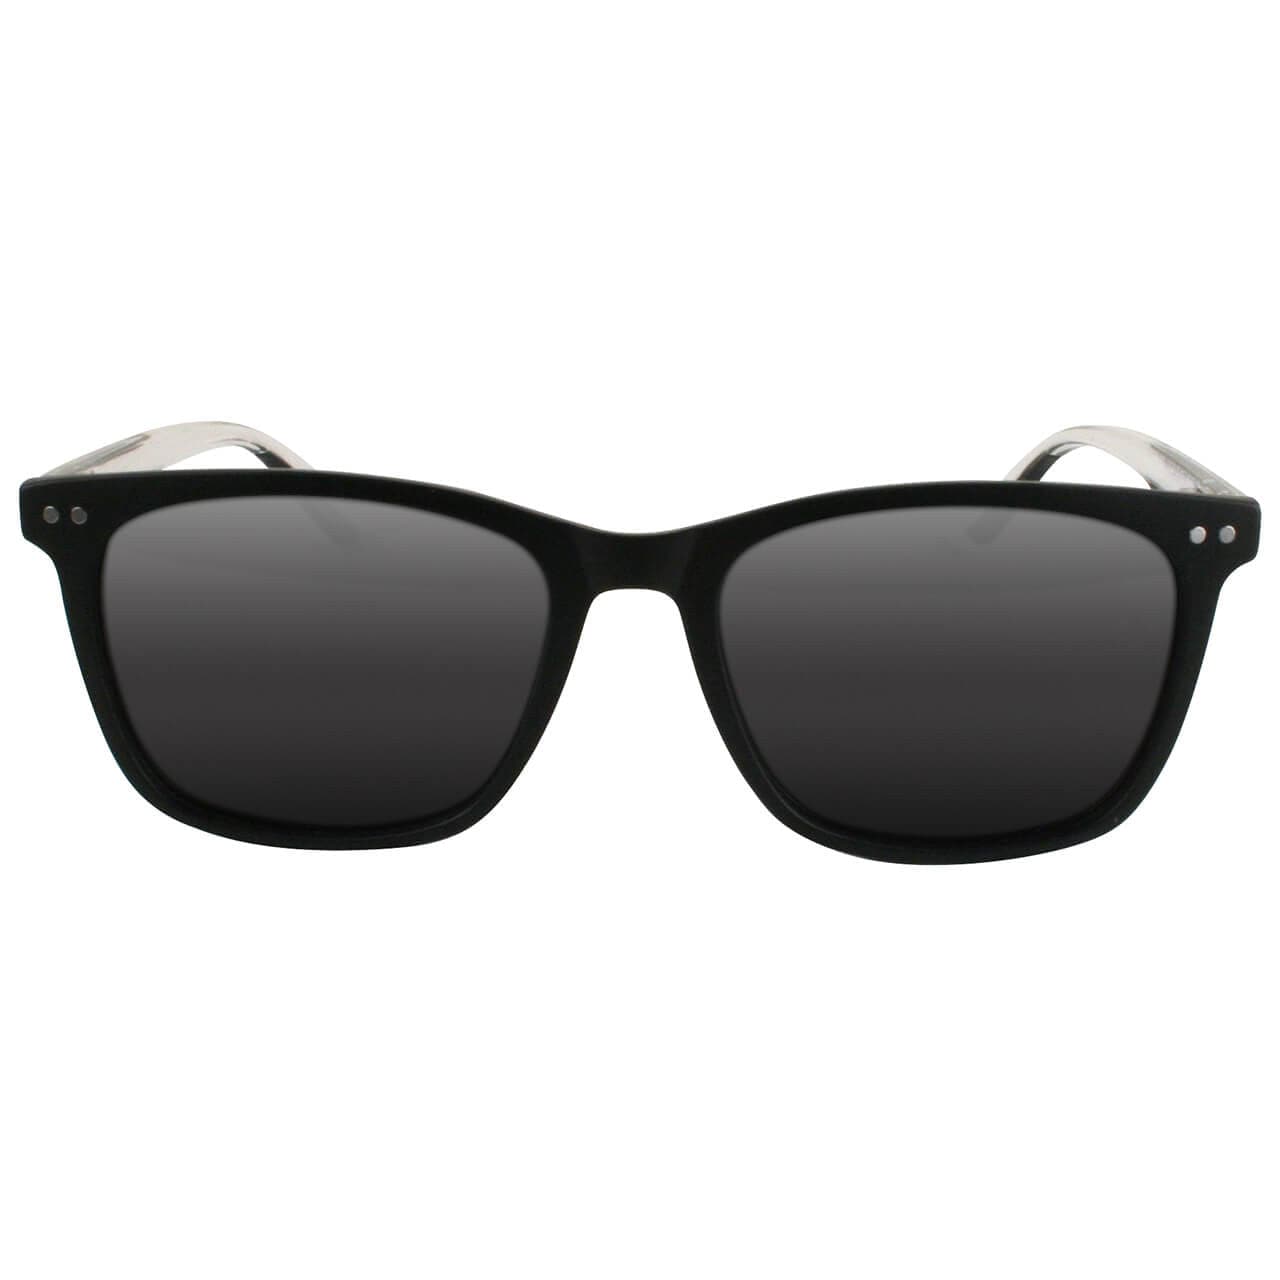 Solect Navigator Sunglasses with Black Frame and Gray Polarized Lenses Front View